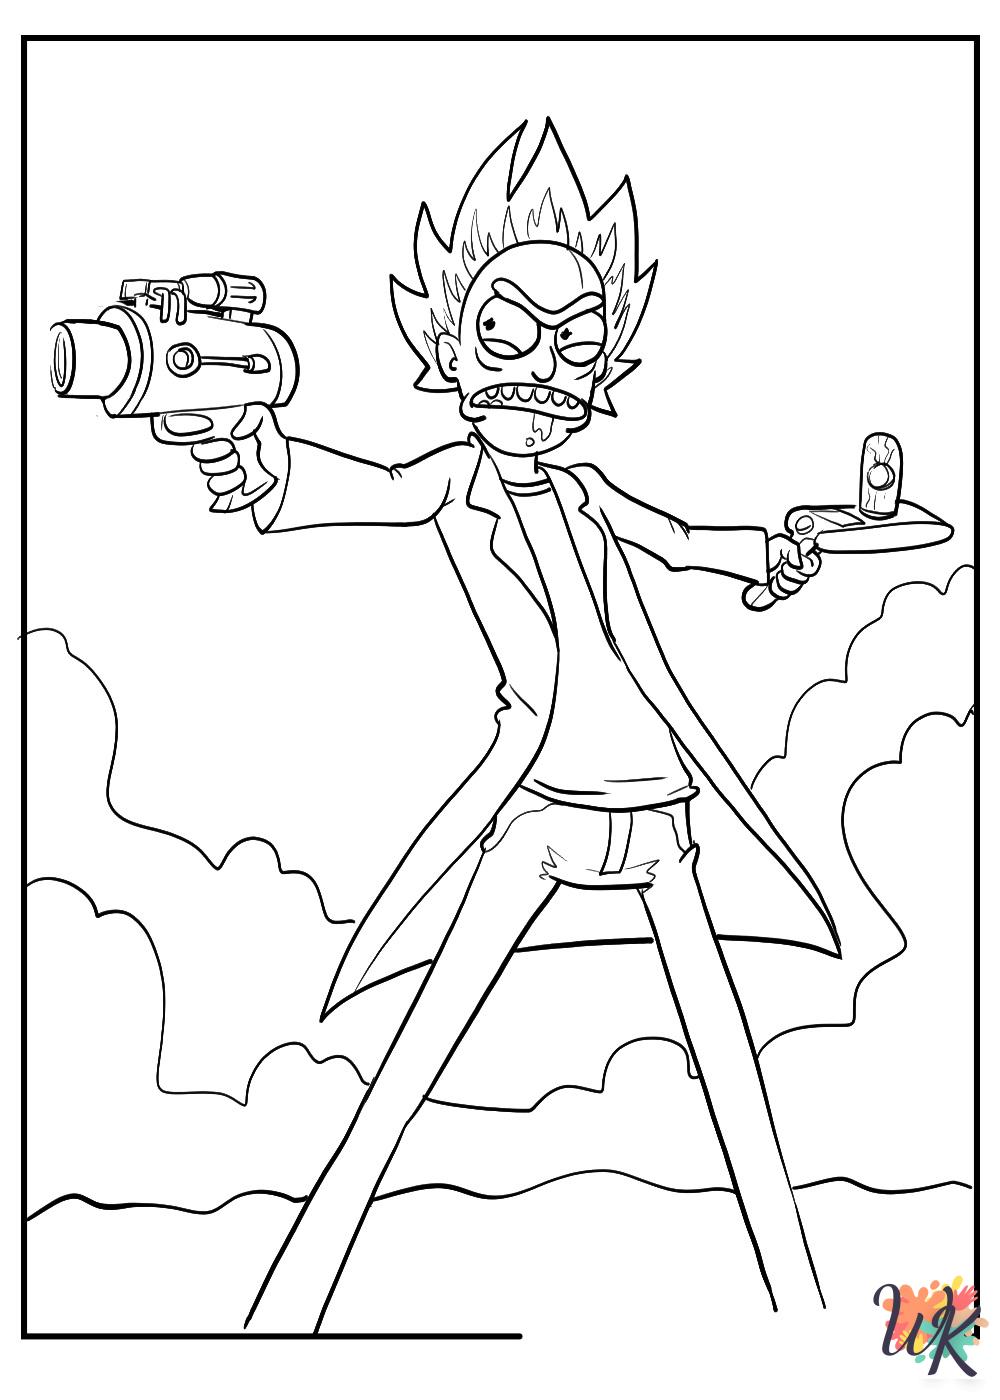 Rick and Morty Coloring Pages 51